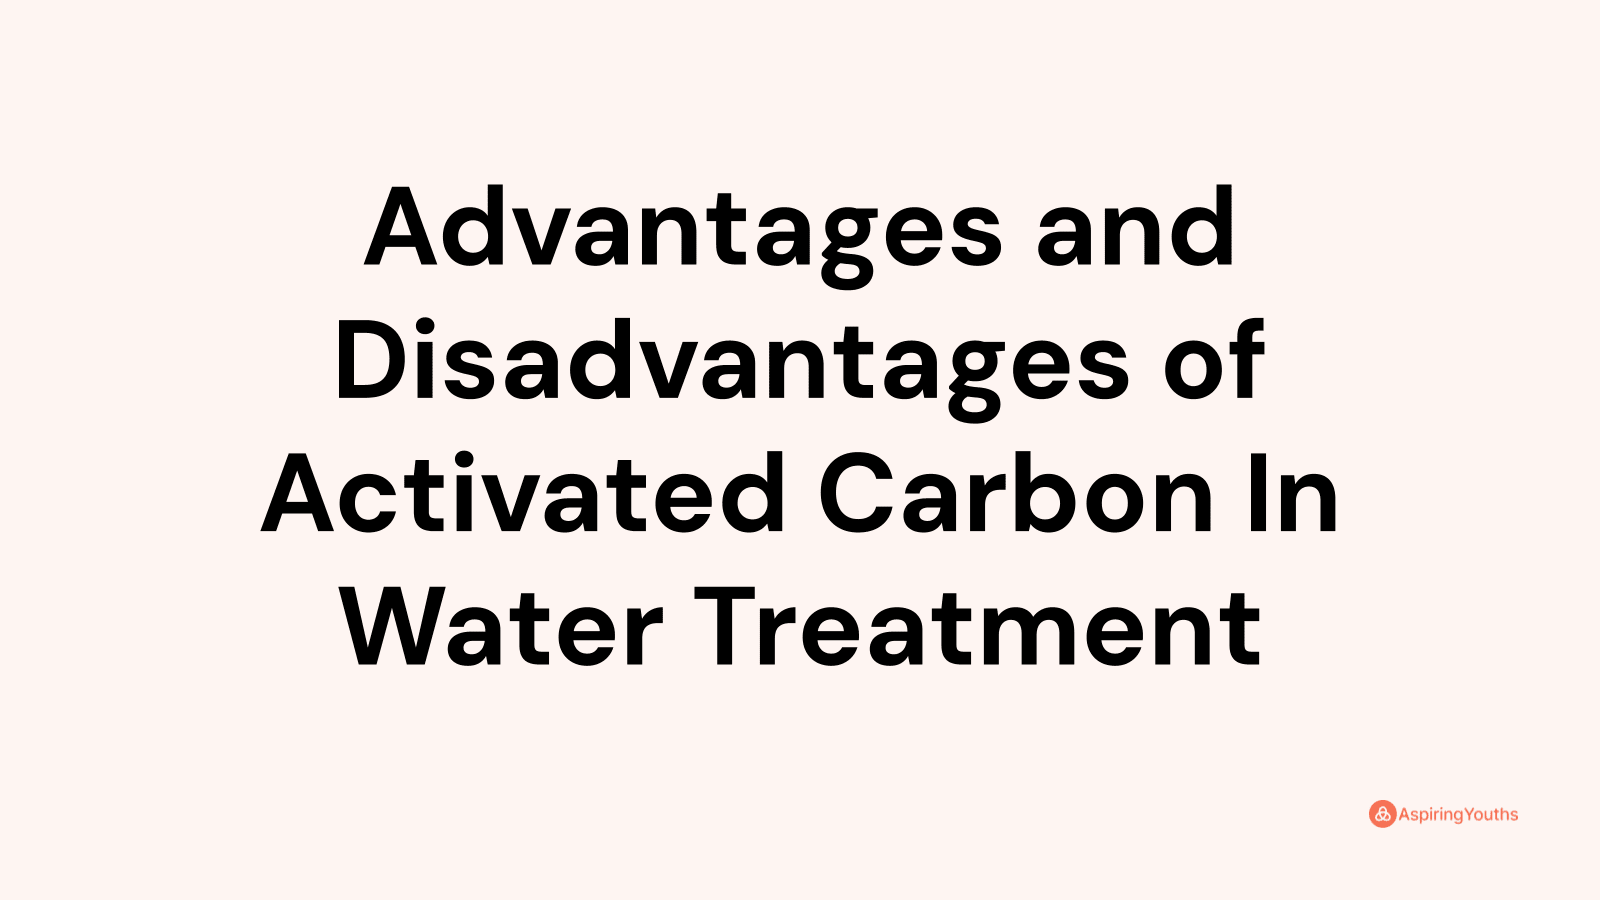 Advantages and disadvantages of Activated Carbon In Water Treatment